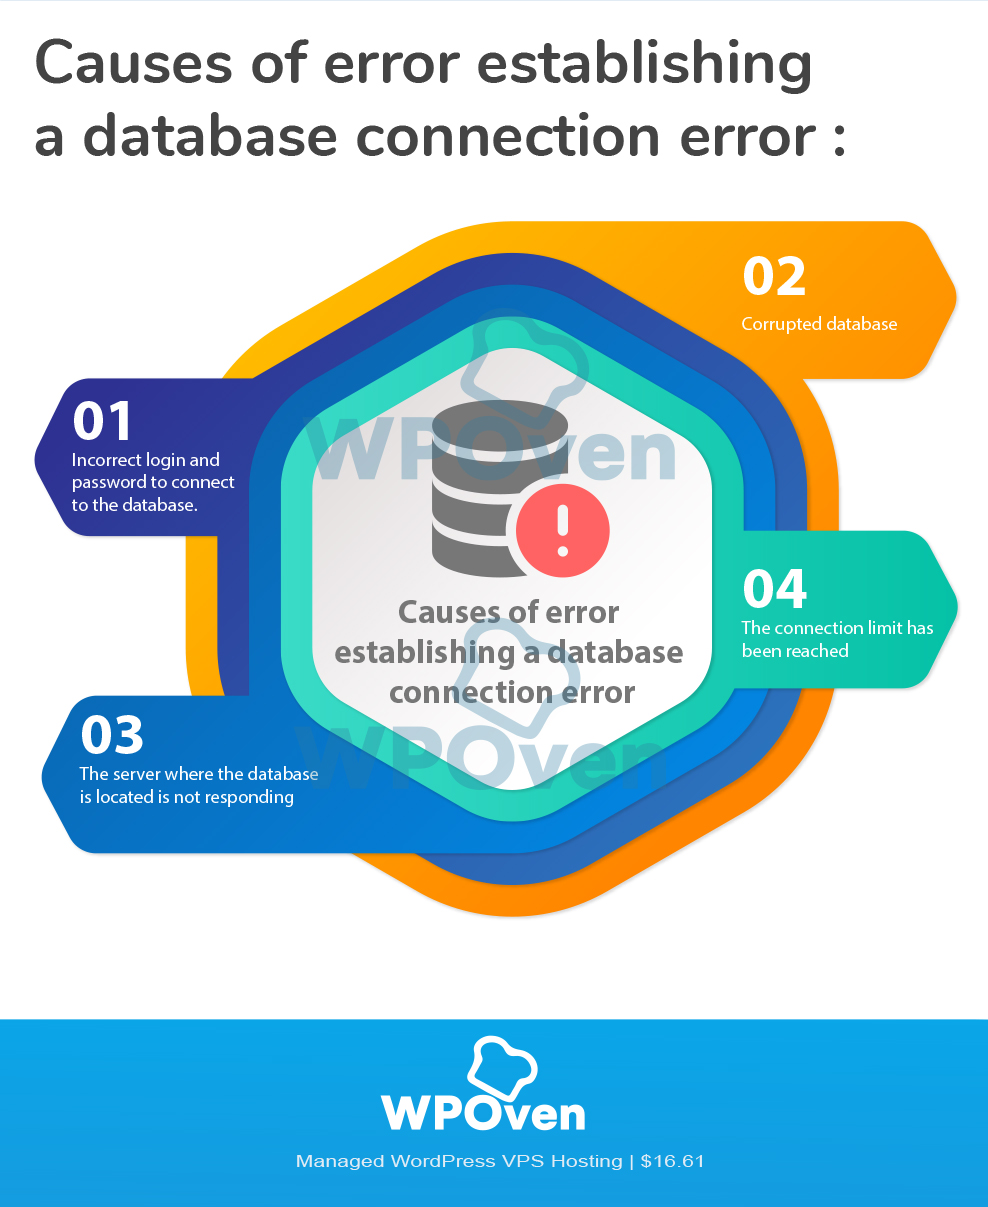 Causes for a database connection error